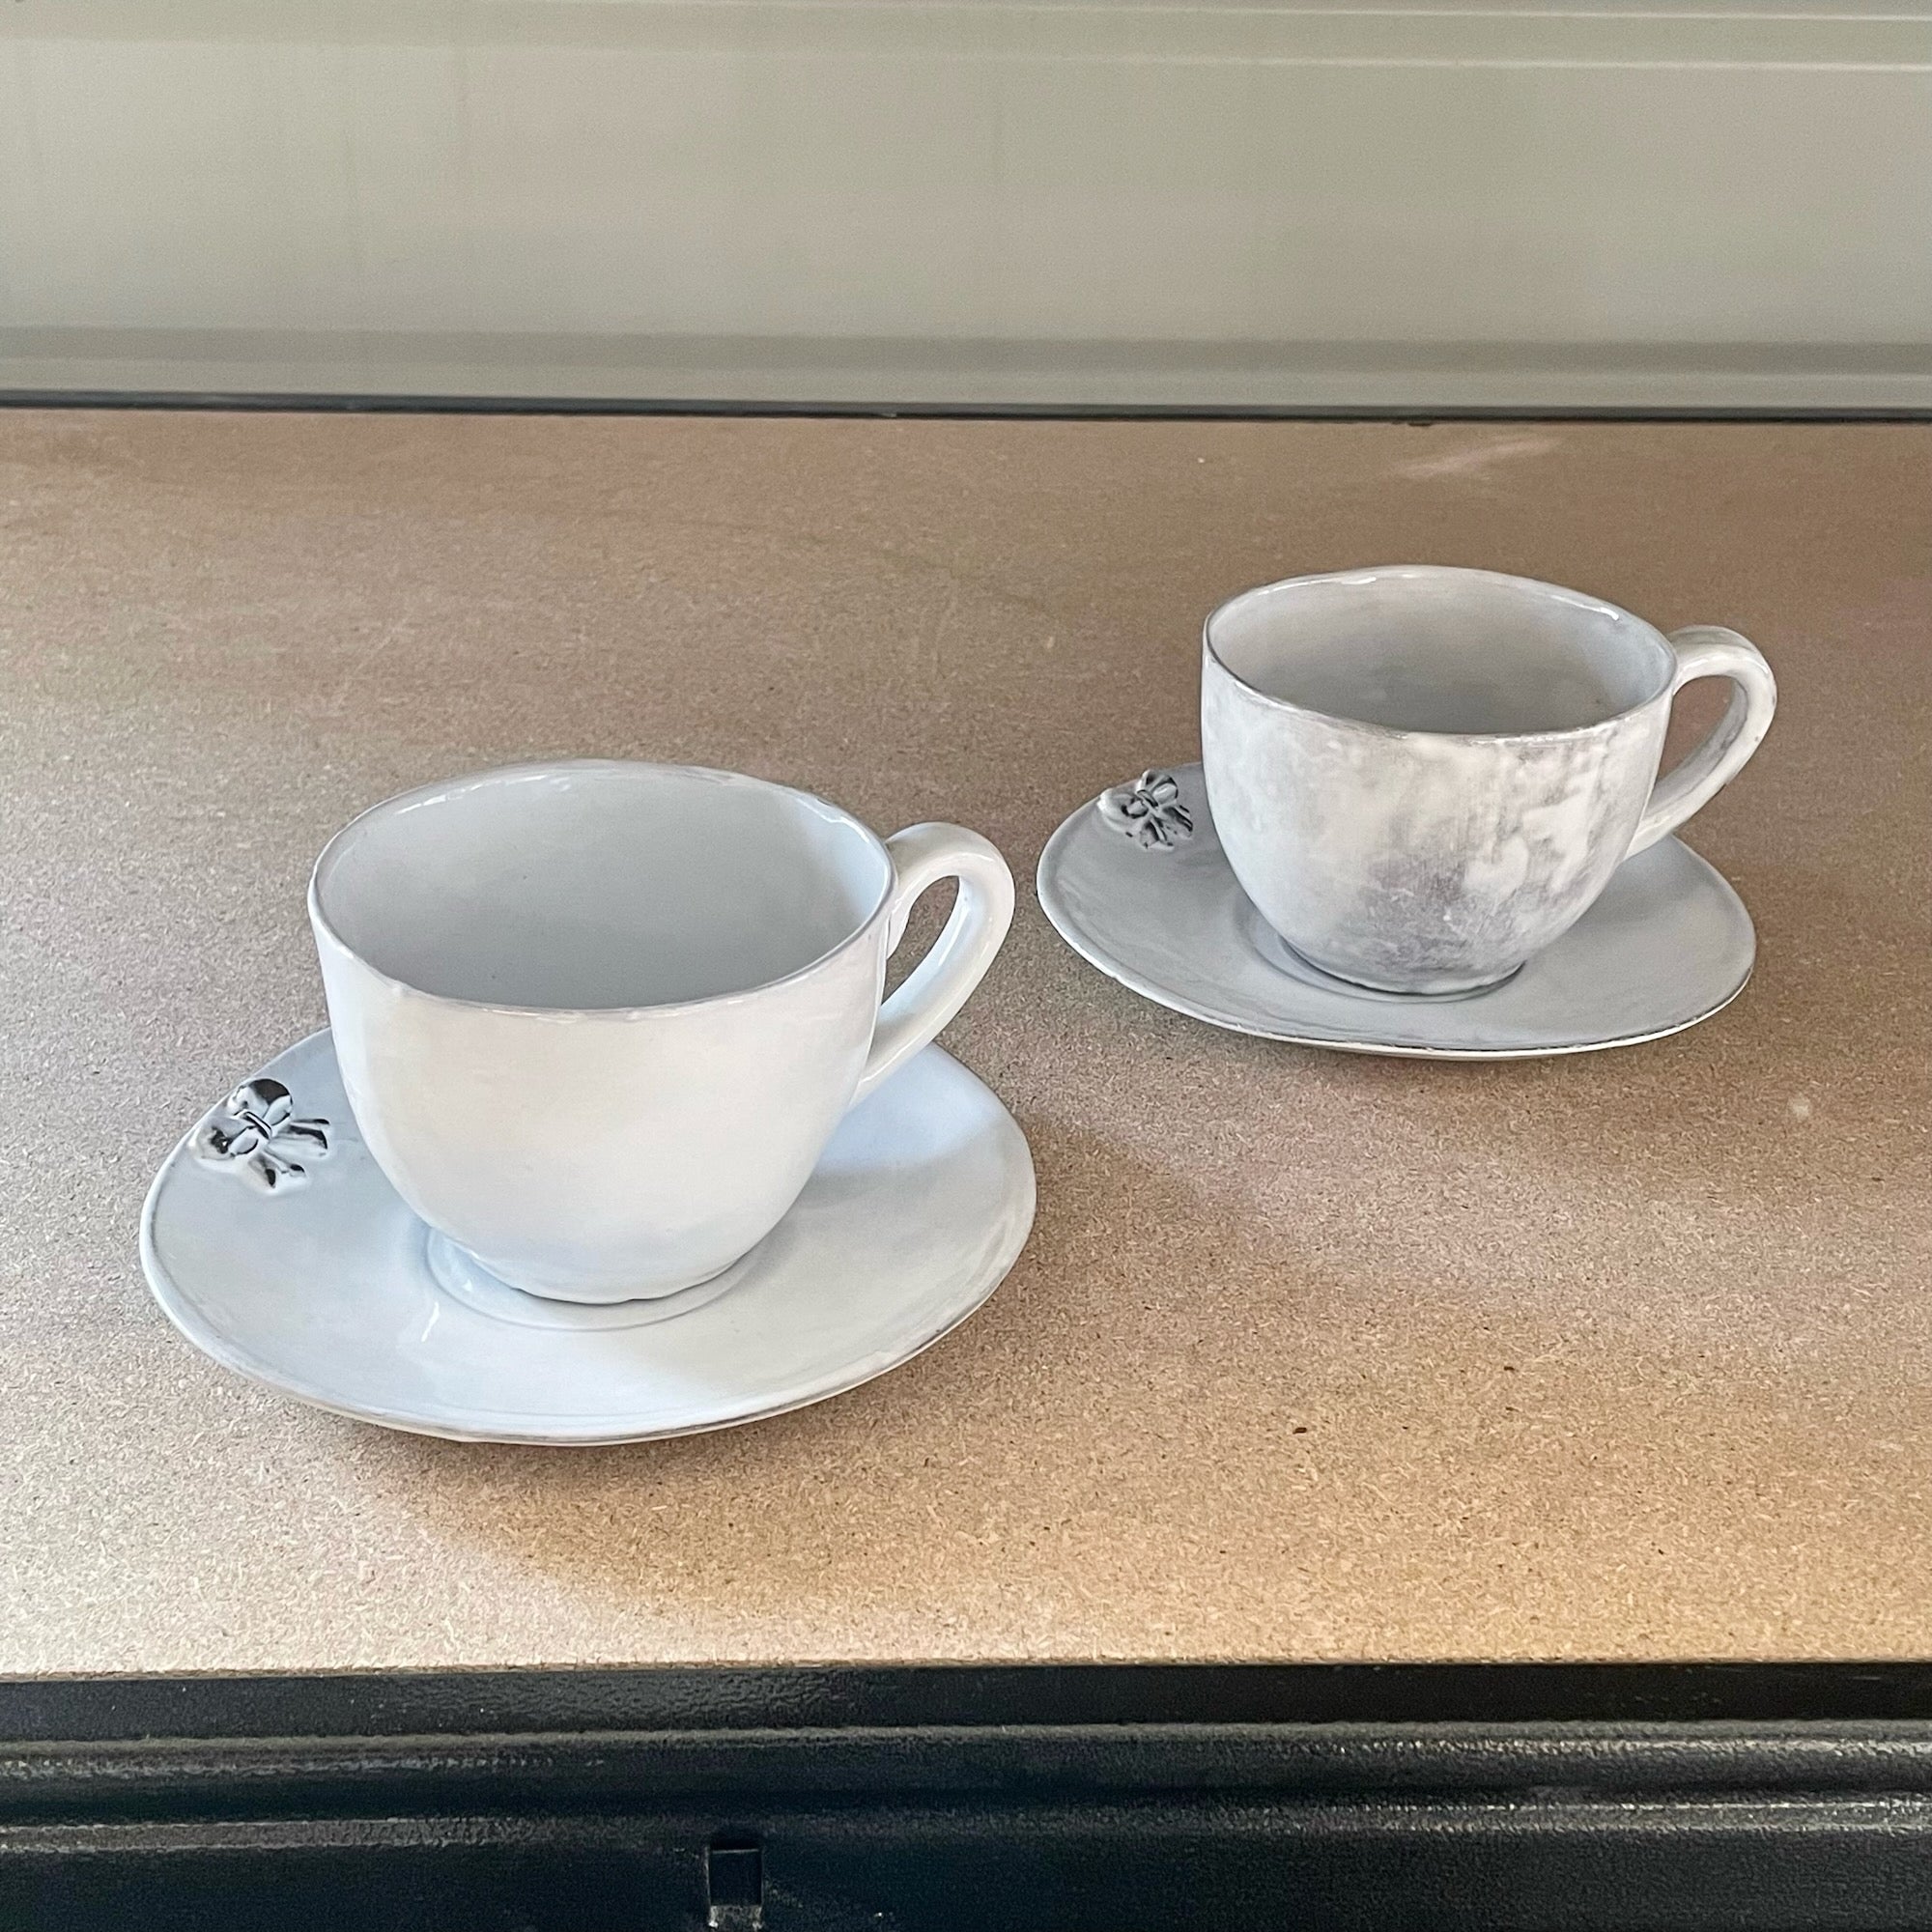 2x Cups and saucers set